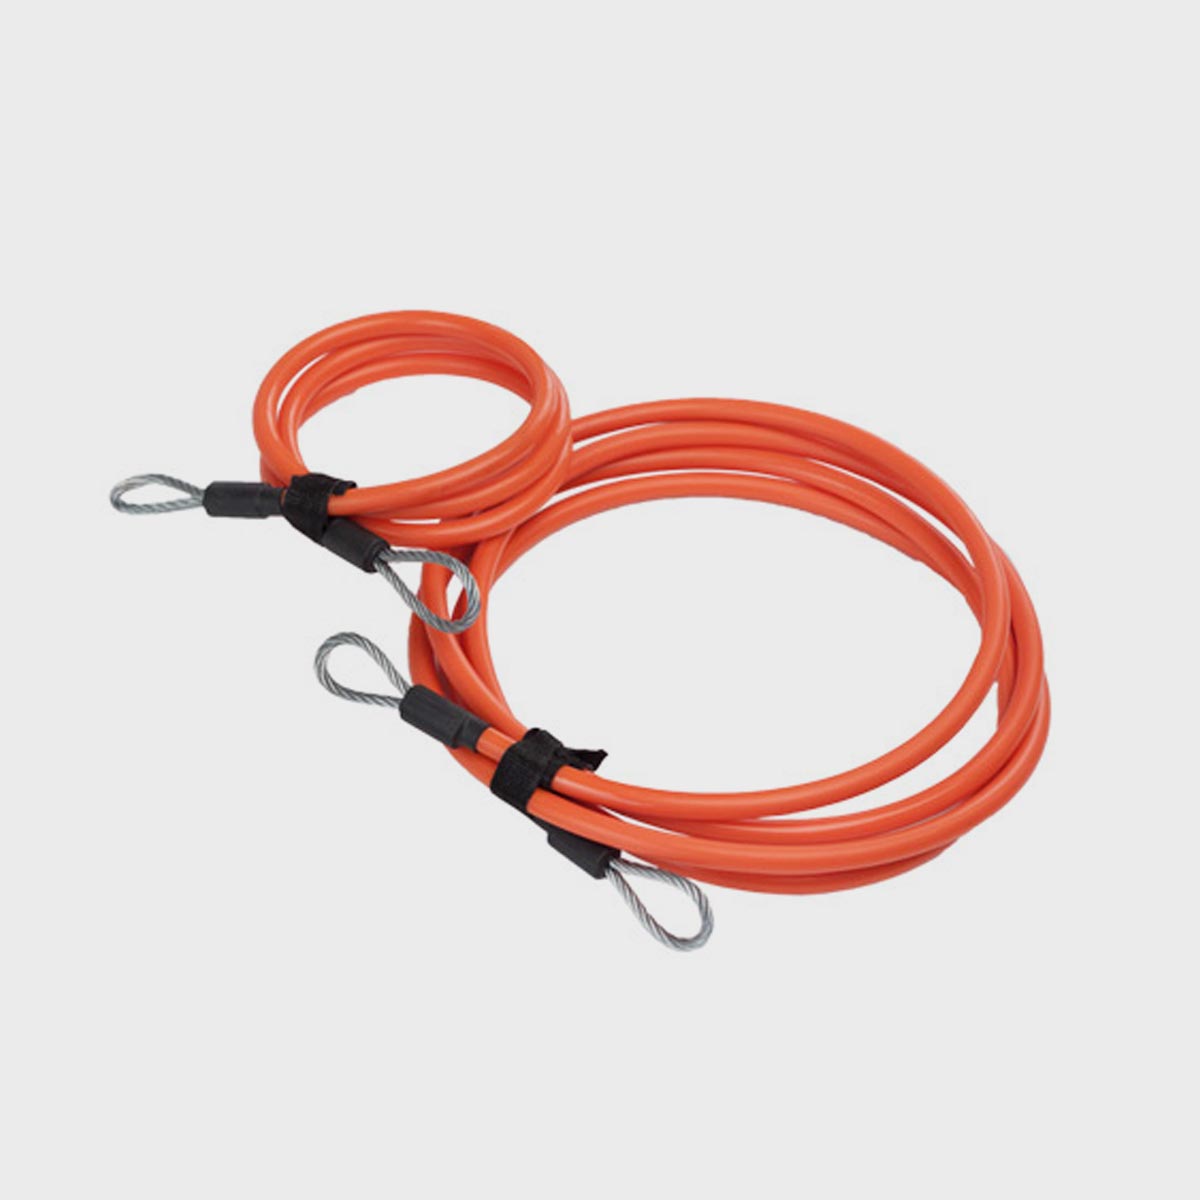 Giant Loop® QuickLoop Security Cables